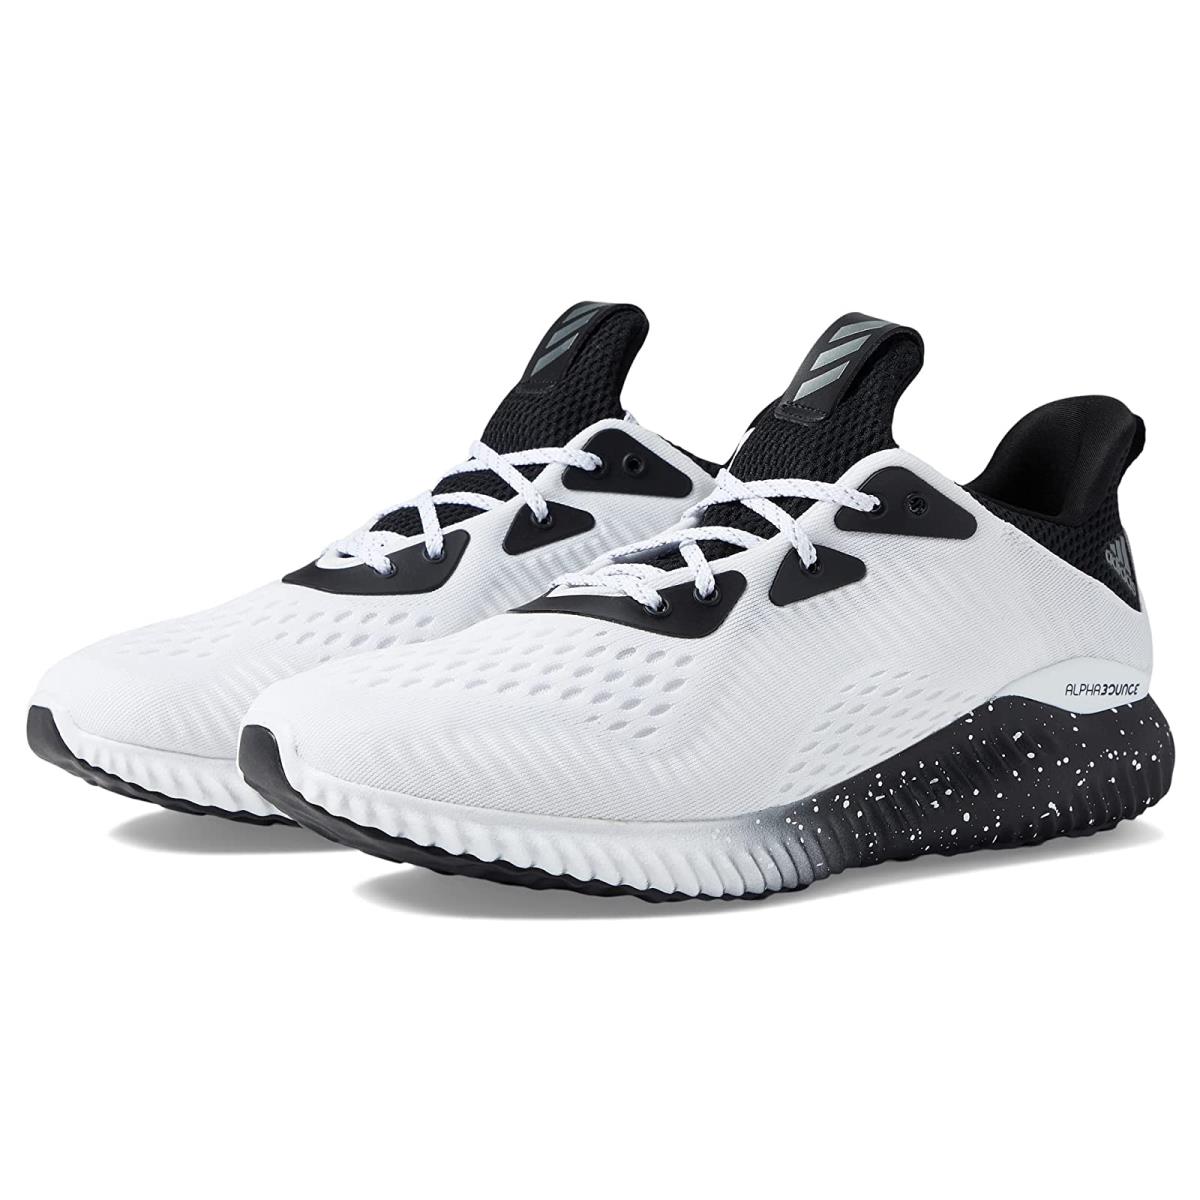 Man`s Sneakers Athletic Shoes Adidas Running Alphabounce 1 White/Iron Metallic/Black